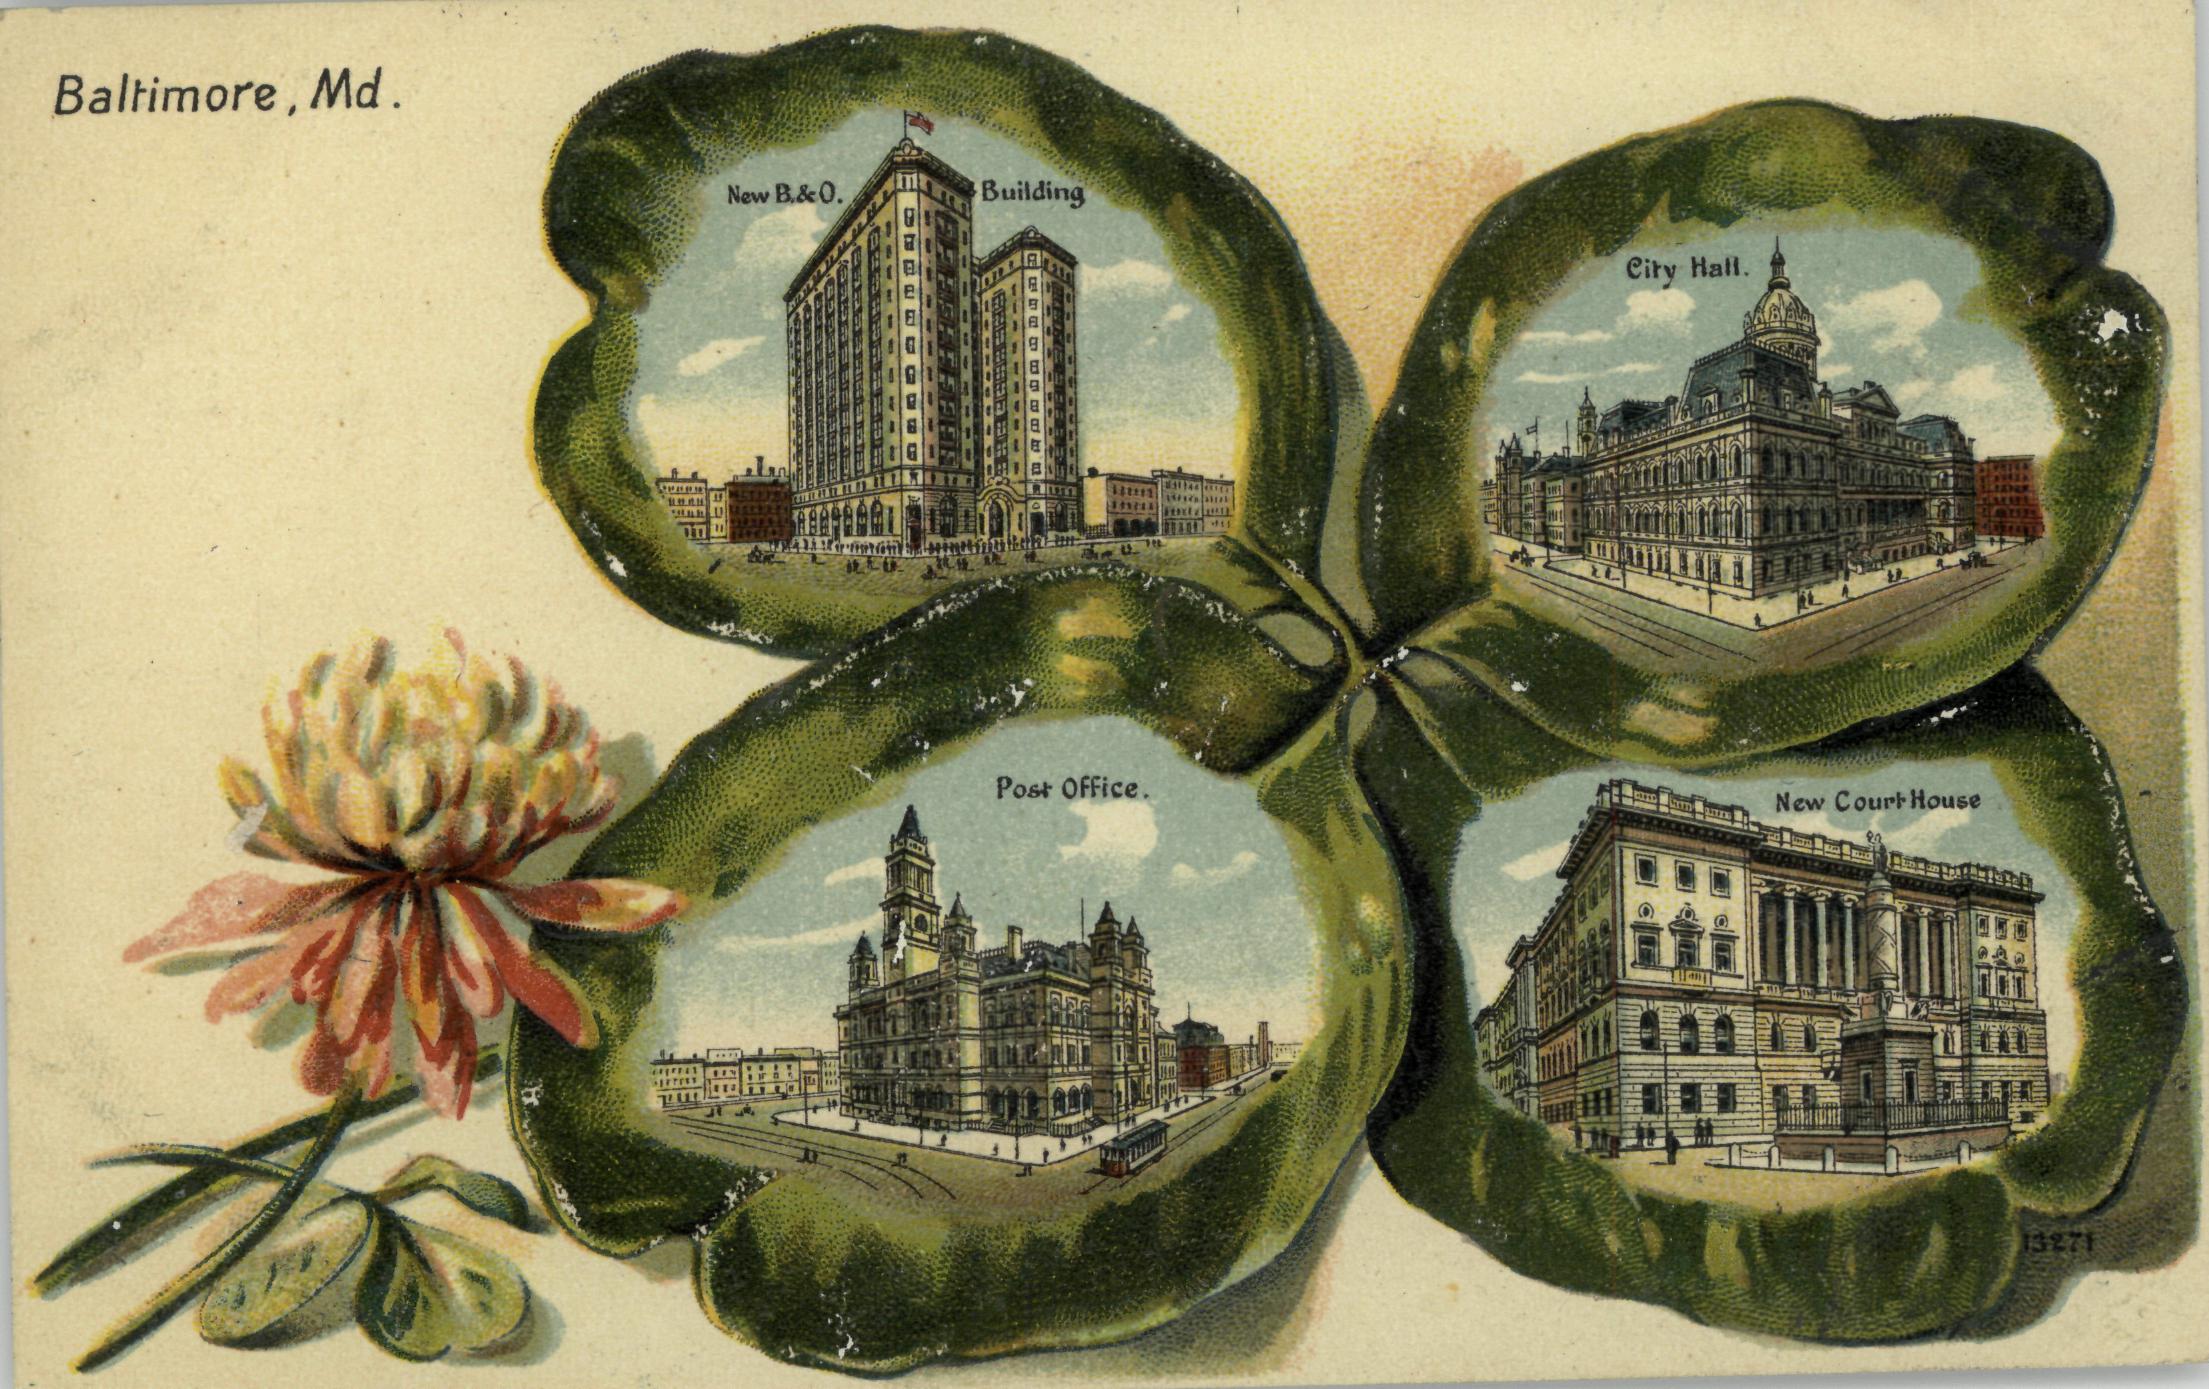 Postcard of Four-left clover with Baltimore scenes circa 1910